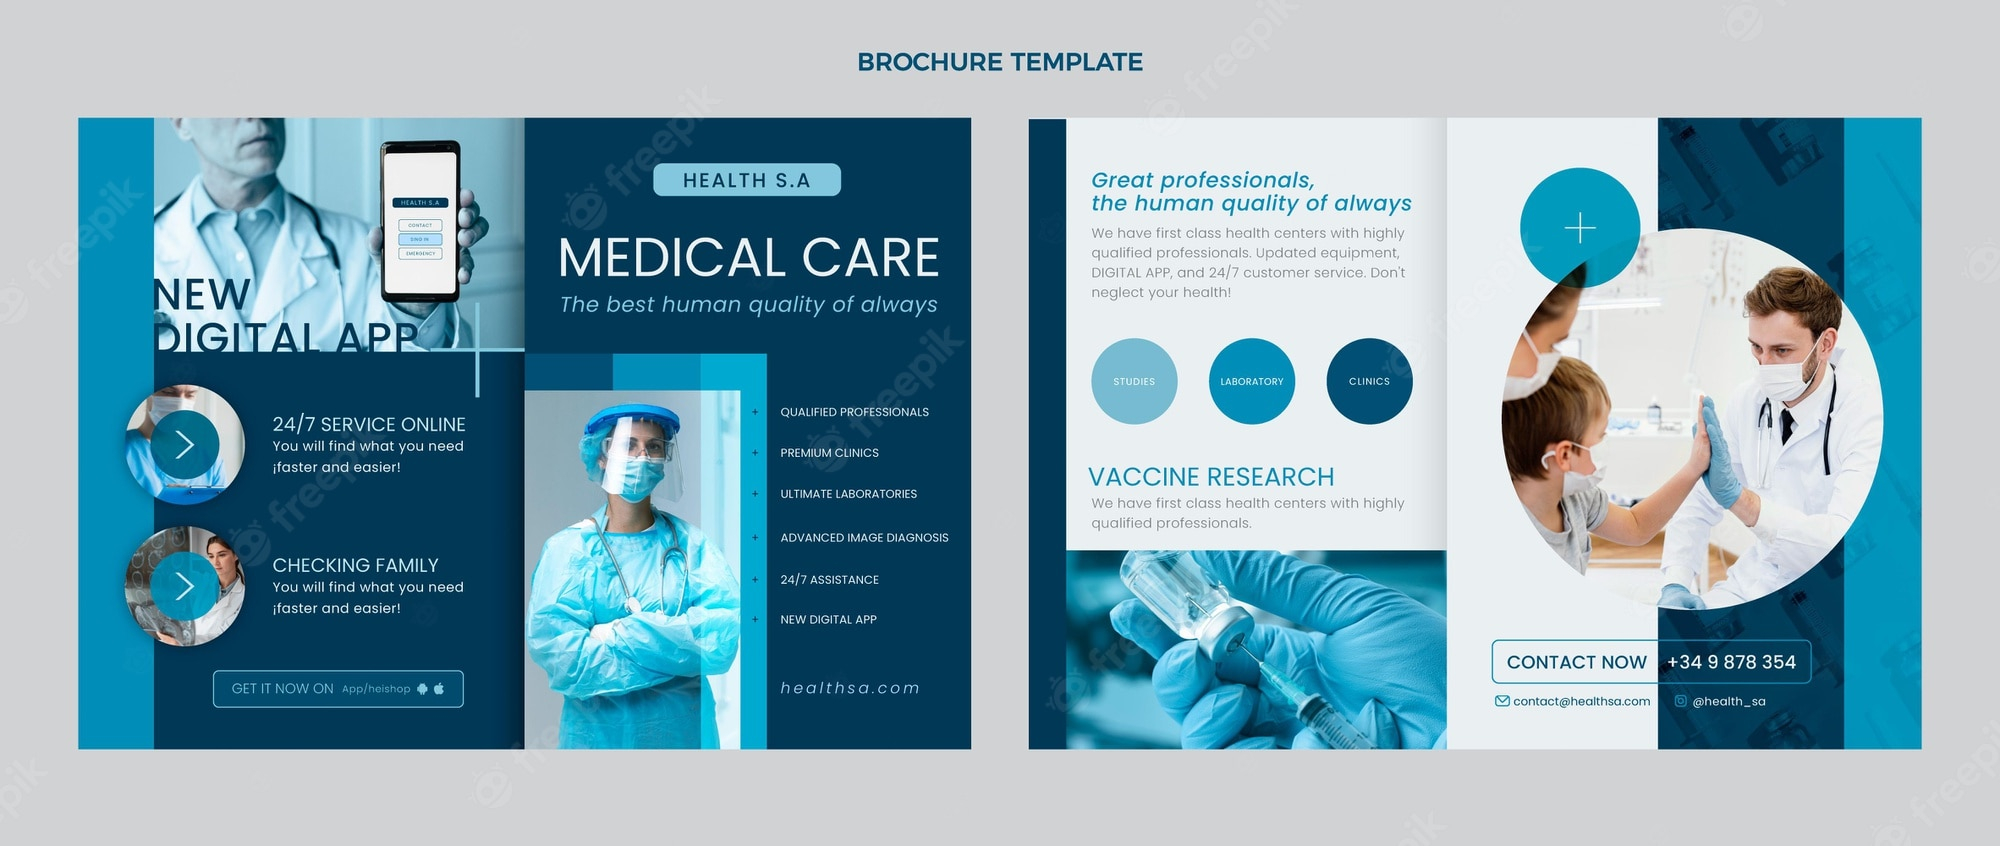 Medical brochure Images  Free Vectors, Stock Photos & PSD Throughout Healthcare Brochure Templates Free Download